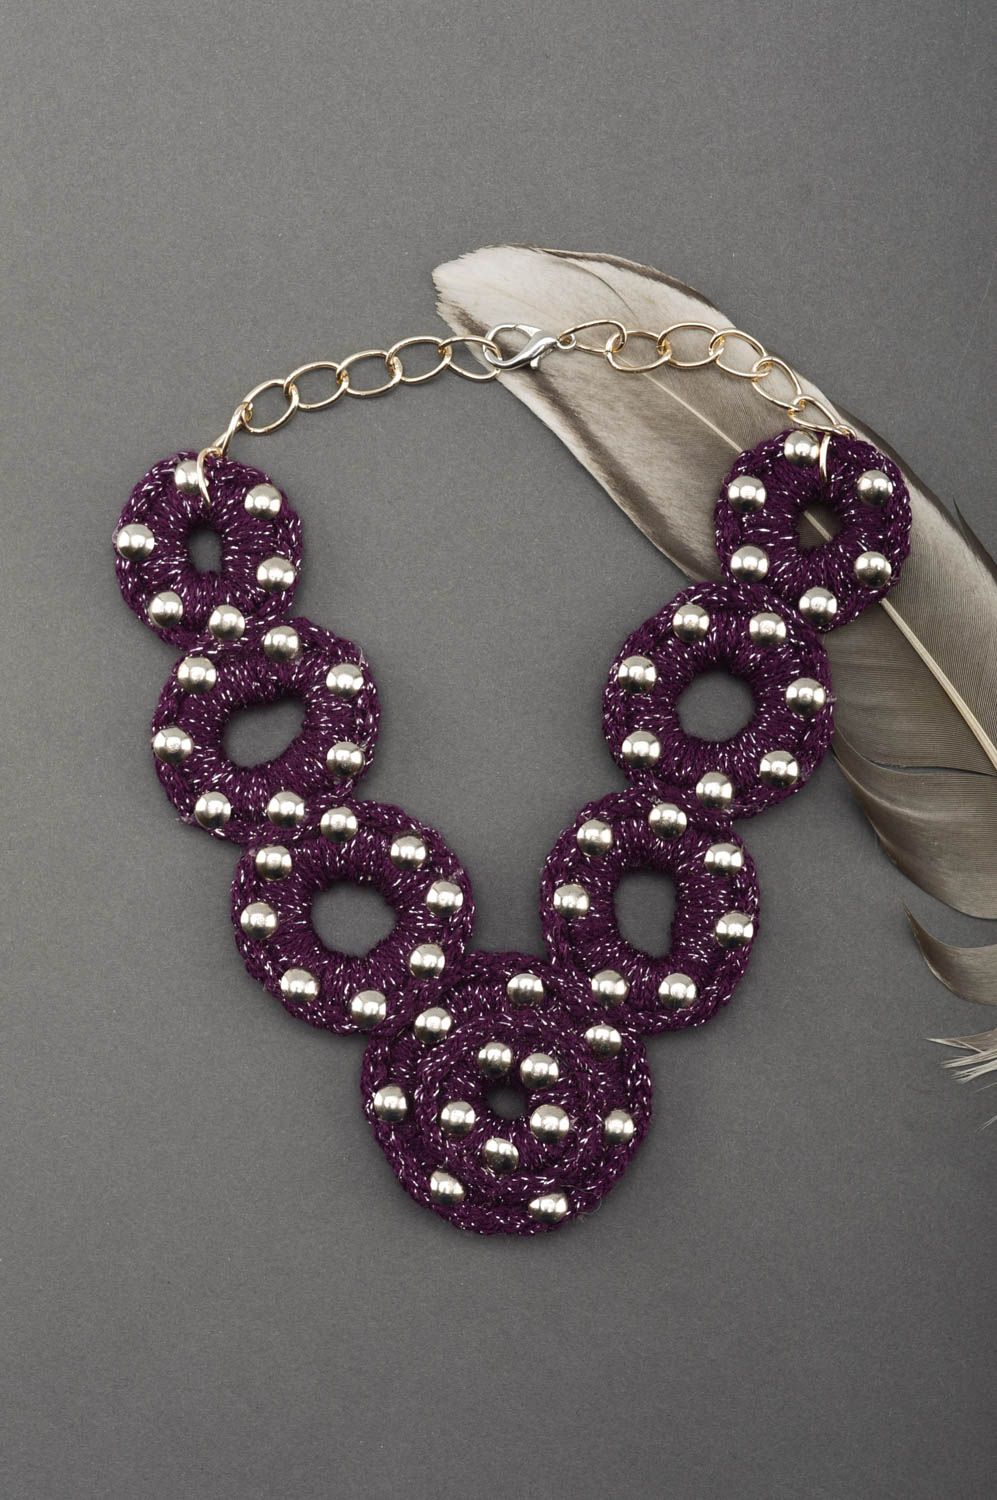 Handmade textile necklace beautiful violet necklace stunning jewelry gift photo 1